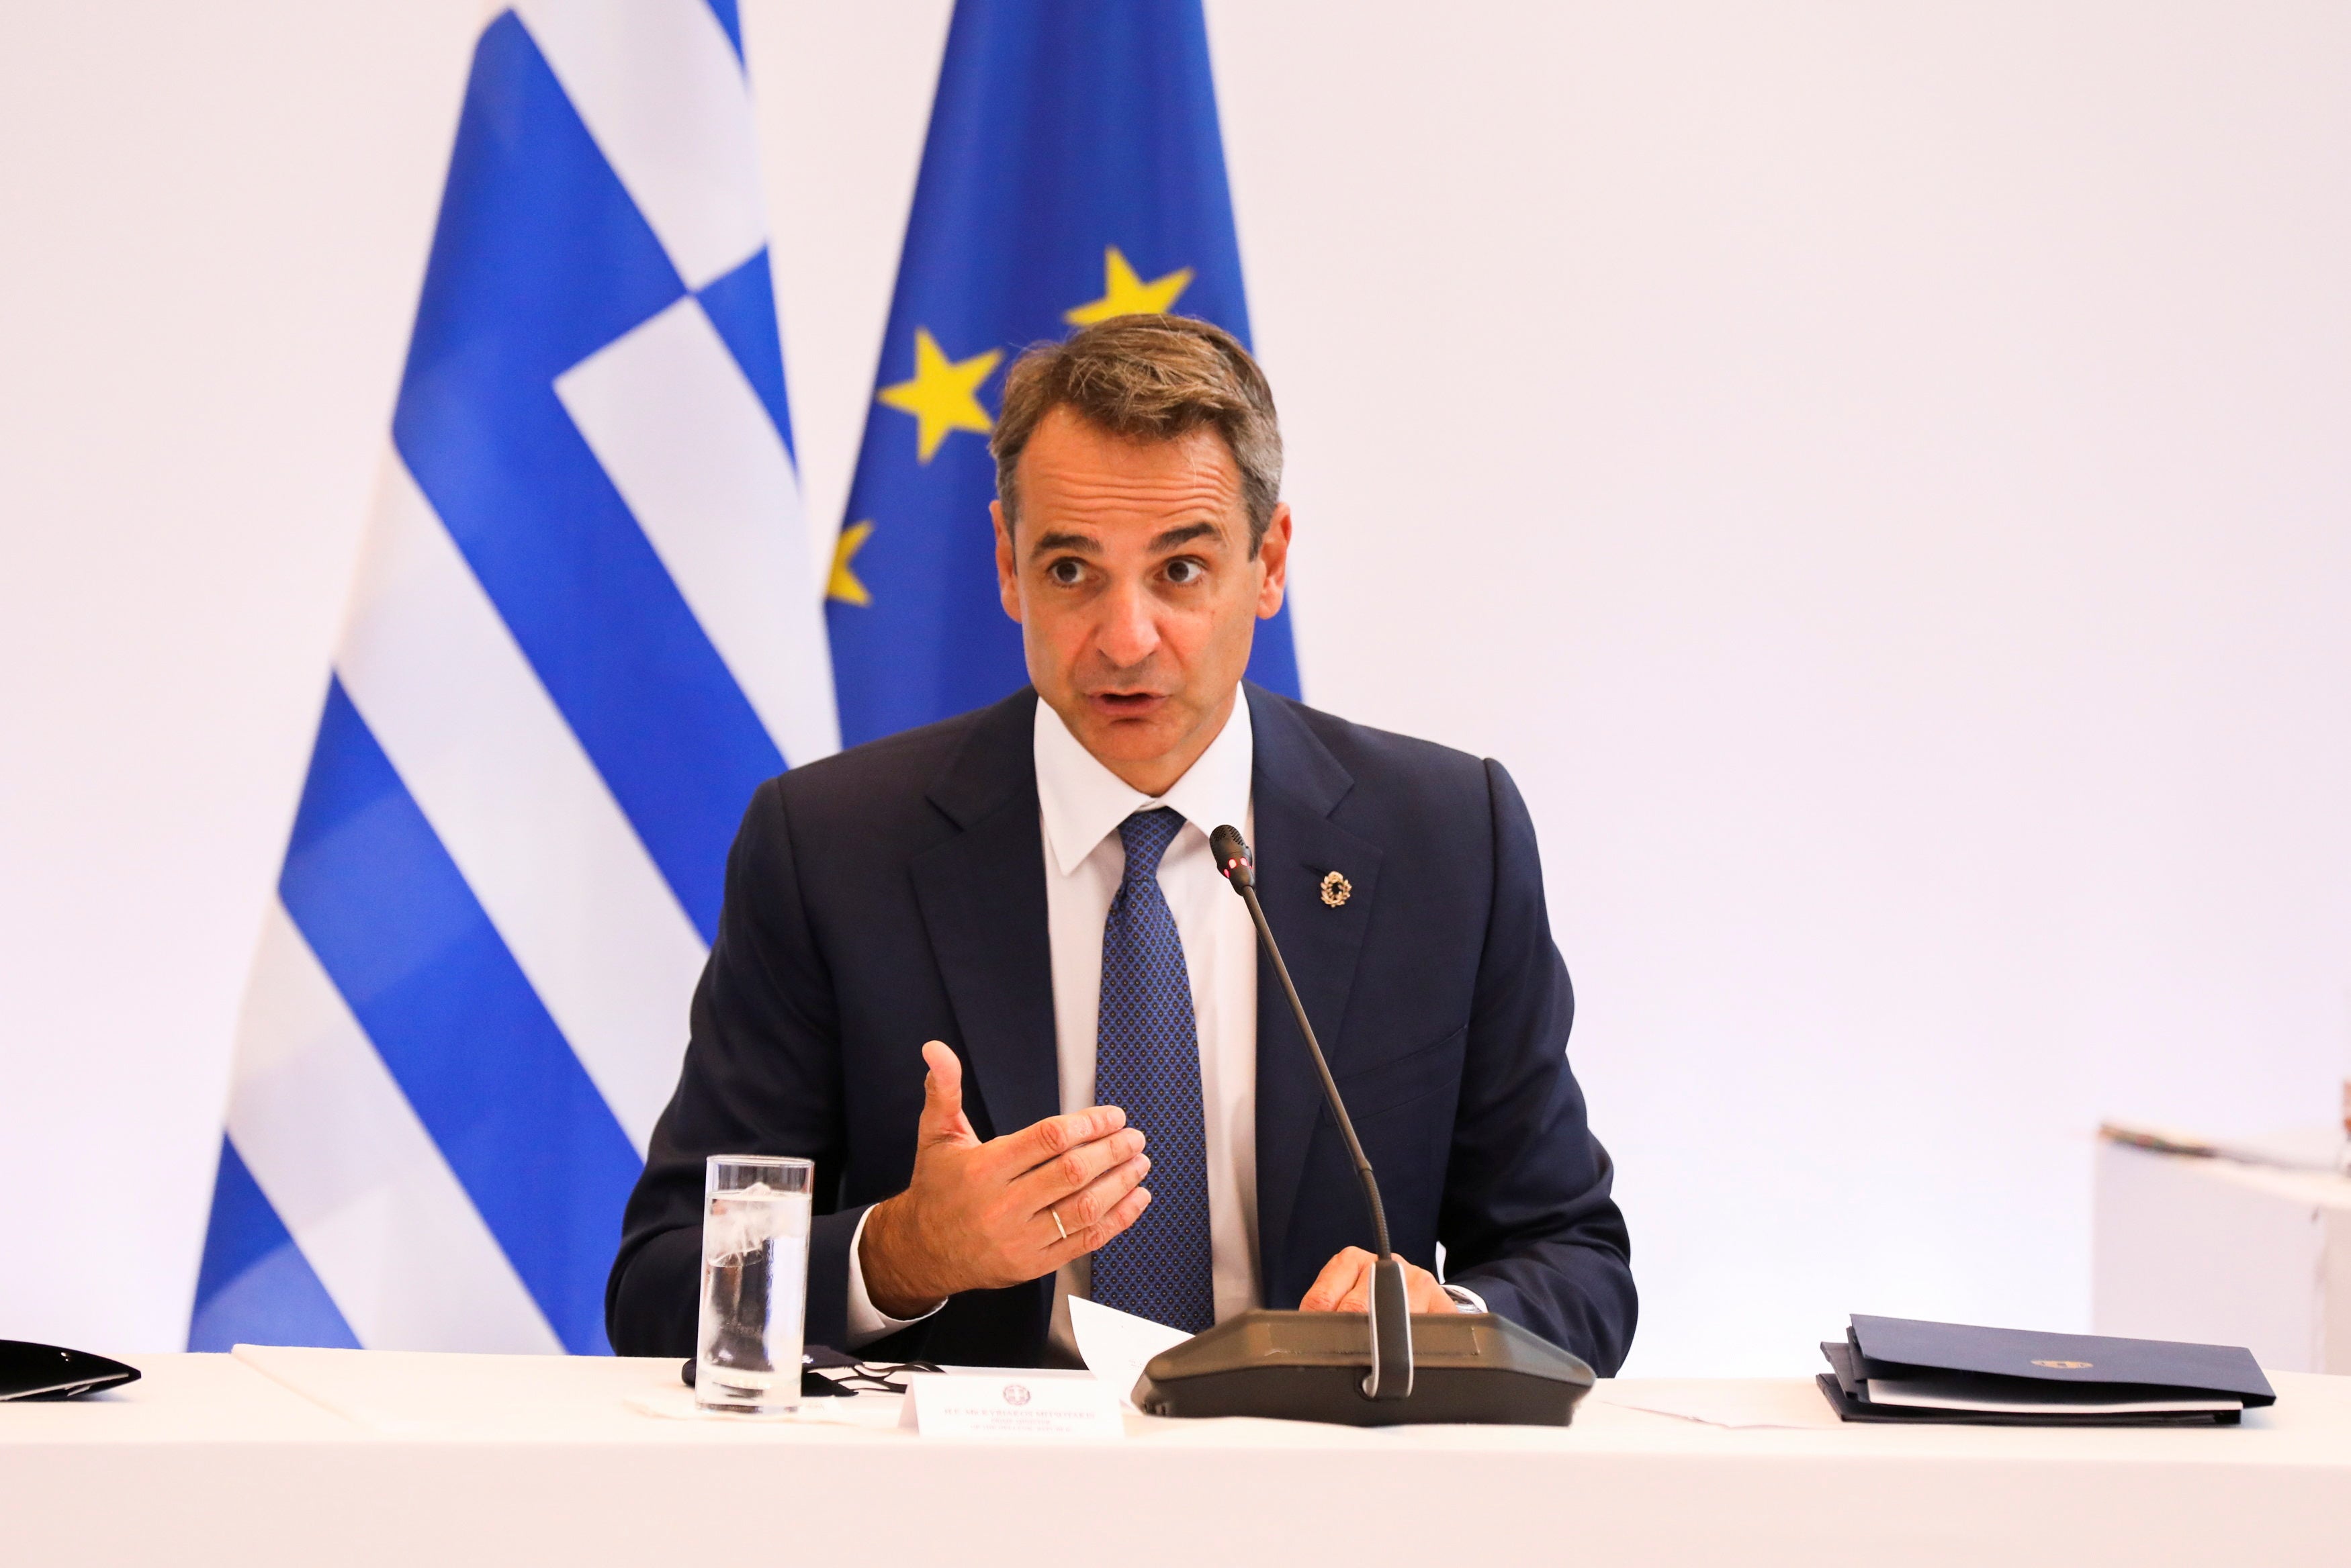 Greek PM Kyriakos Mitsotakis announced funds to help rebuild affected areas